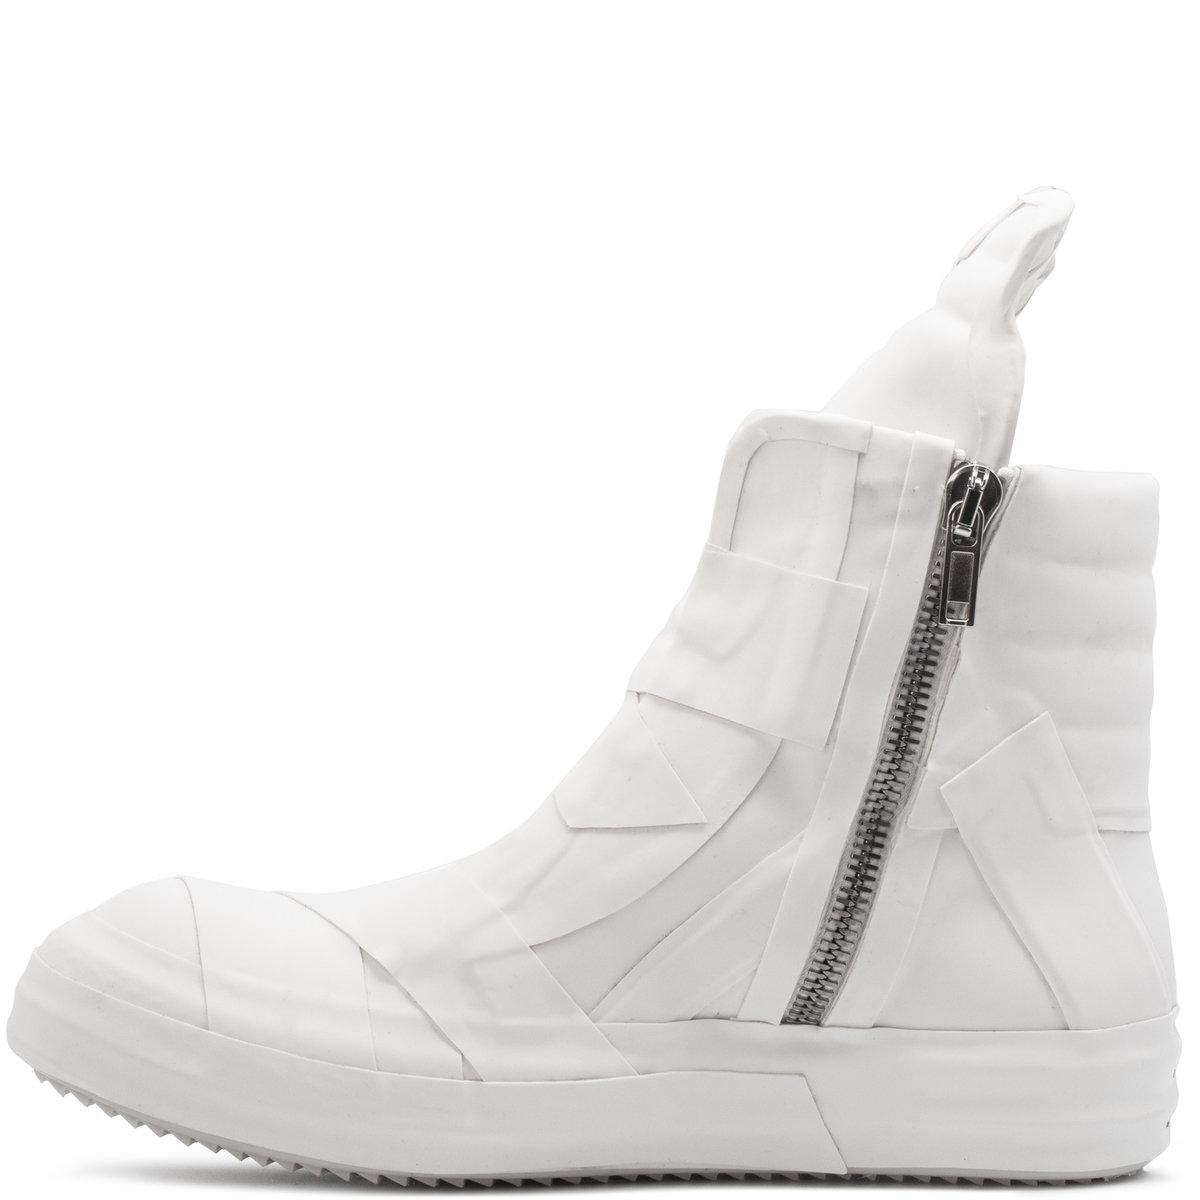 Rick Owens Rubber Panelled Geobasket Sneakers in White for Men | Lyst